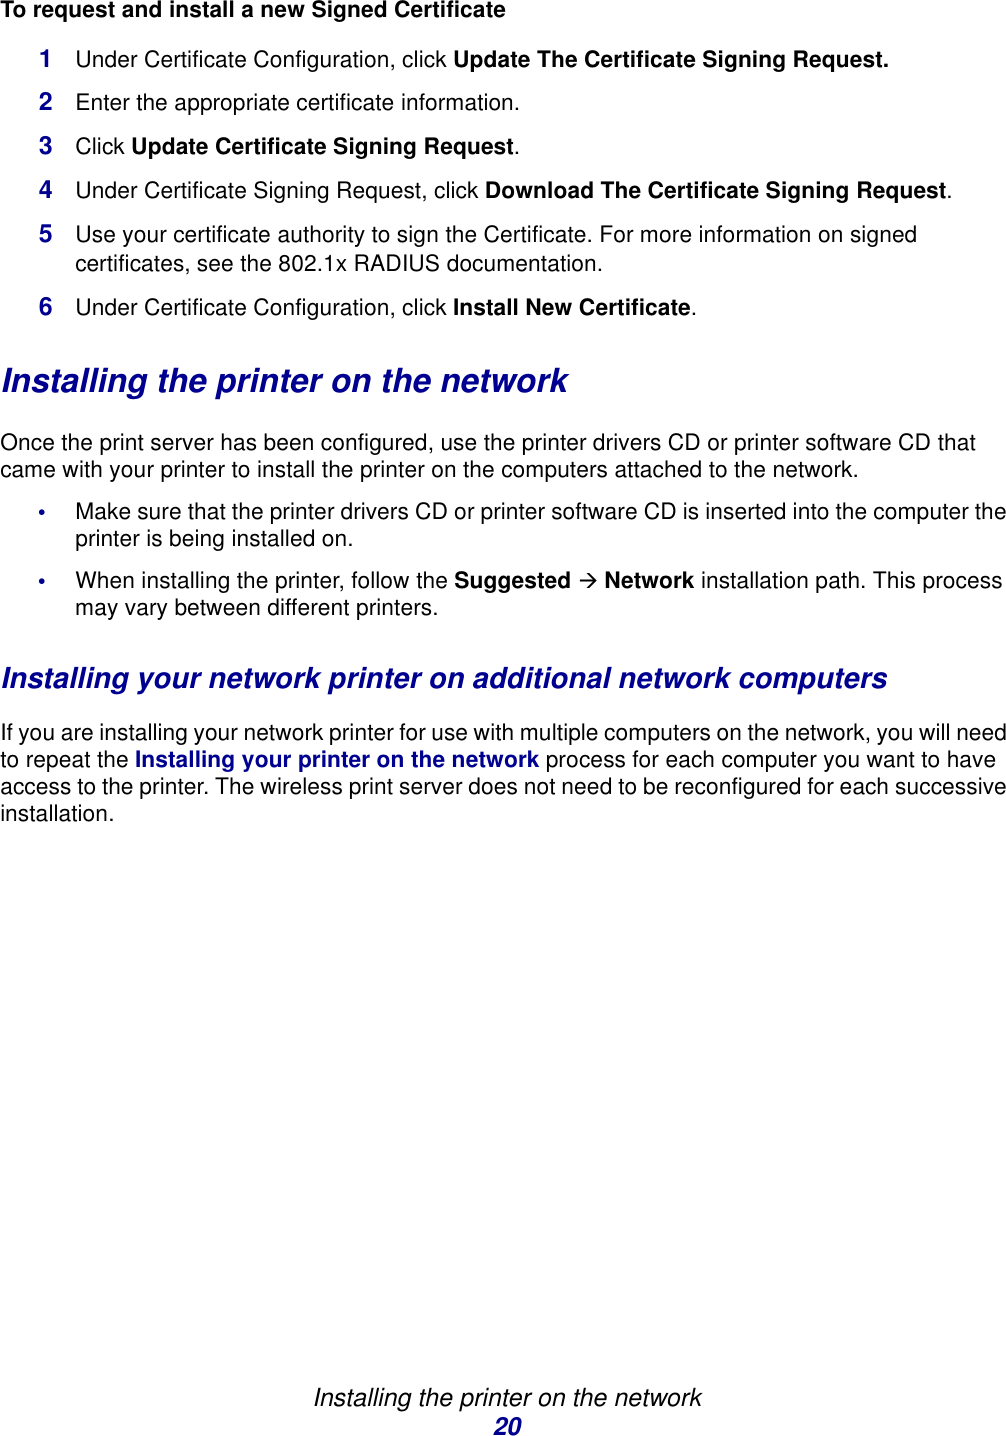 Installing the printer on the network20To request and install a new Signed Certificate1Under Certificate Configuration, click Update The Certificate Signing Request.2Enter the appropriate certificate information.3Click Update Certificate Signing Request. 4Under Certificate Signing Request, click Download The Certificate Signing Request. 5Use your certificate authority to sign the Certificate. For more information on signed certificates, see the 802.1x RADIUS documentation. 6Under Certificate Configuration, click Install New Certificate. Installing the printer on the networkOnce the print server has been configured, use the printer drivers CD or printer software CD that came with your printer to install the printer on the computers attached to the network. •Make sure that the printer drivers CD or printer software CD is inserted into the computer the printer is being installed on.•When installing the printer, follow the Suggested Æ Network installation path. This process may vary between different printers. Installing your network printer on additional network computersIf you are installing your network printer for use with multiple computers on the network, you will need to repeat the Installing your printer on the network process for each computer you want to have access to the printer. The wireless print server does not need to be reconfigured for each successive installation. 